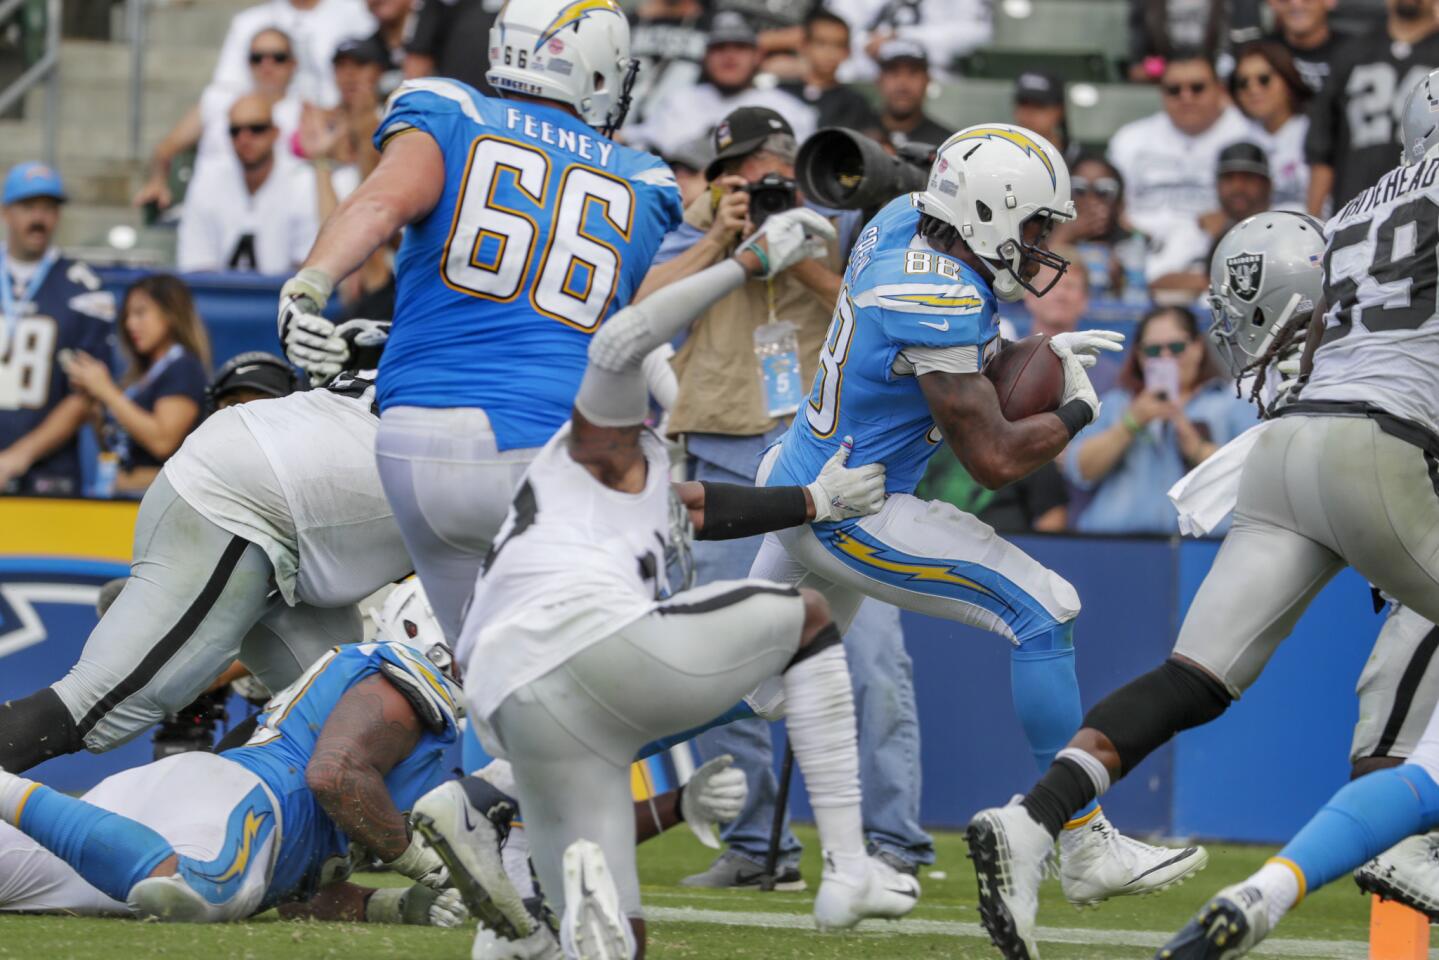 Chargers tight end Virgil Green runs past Oakland Raiders defenders for a third quarter, 13-yard touchdown on a pass from Philip Rivers at StubHub Center on Sunday.